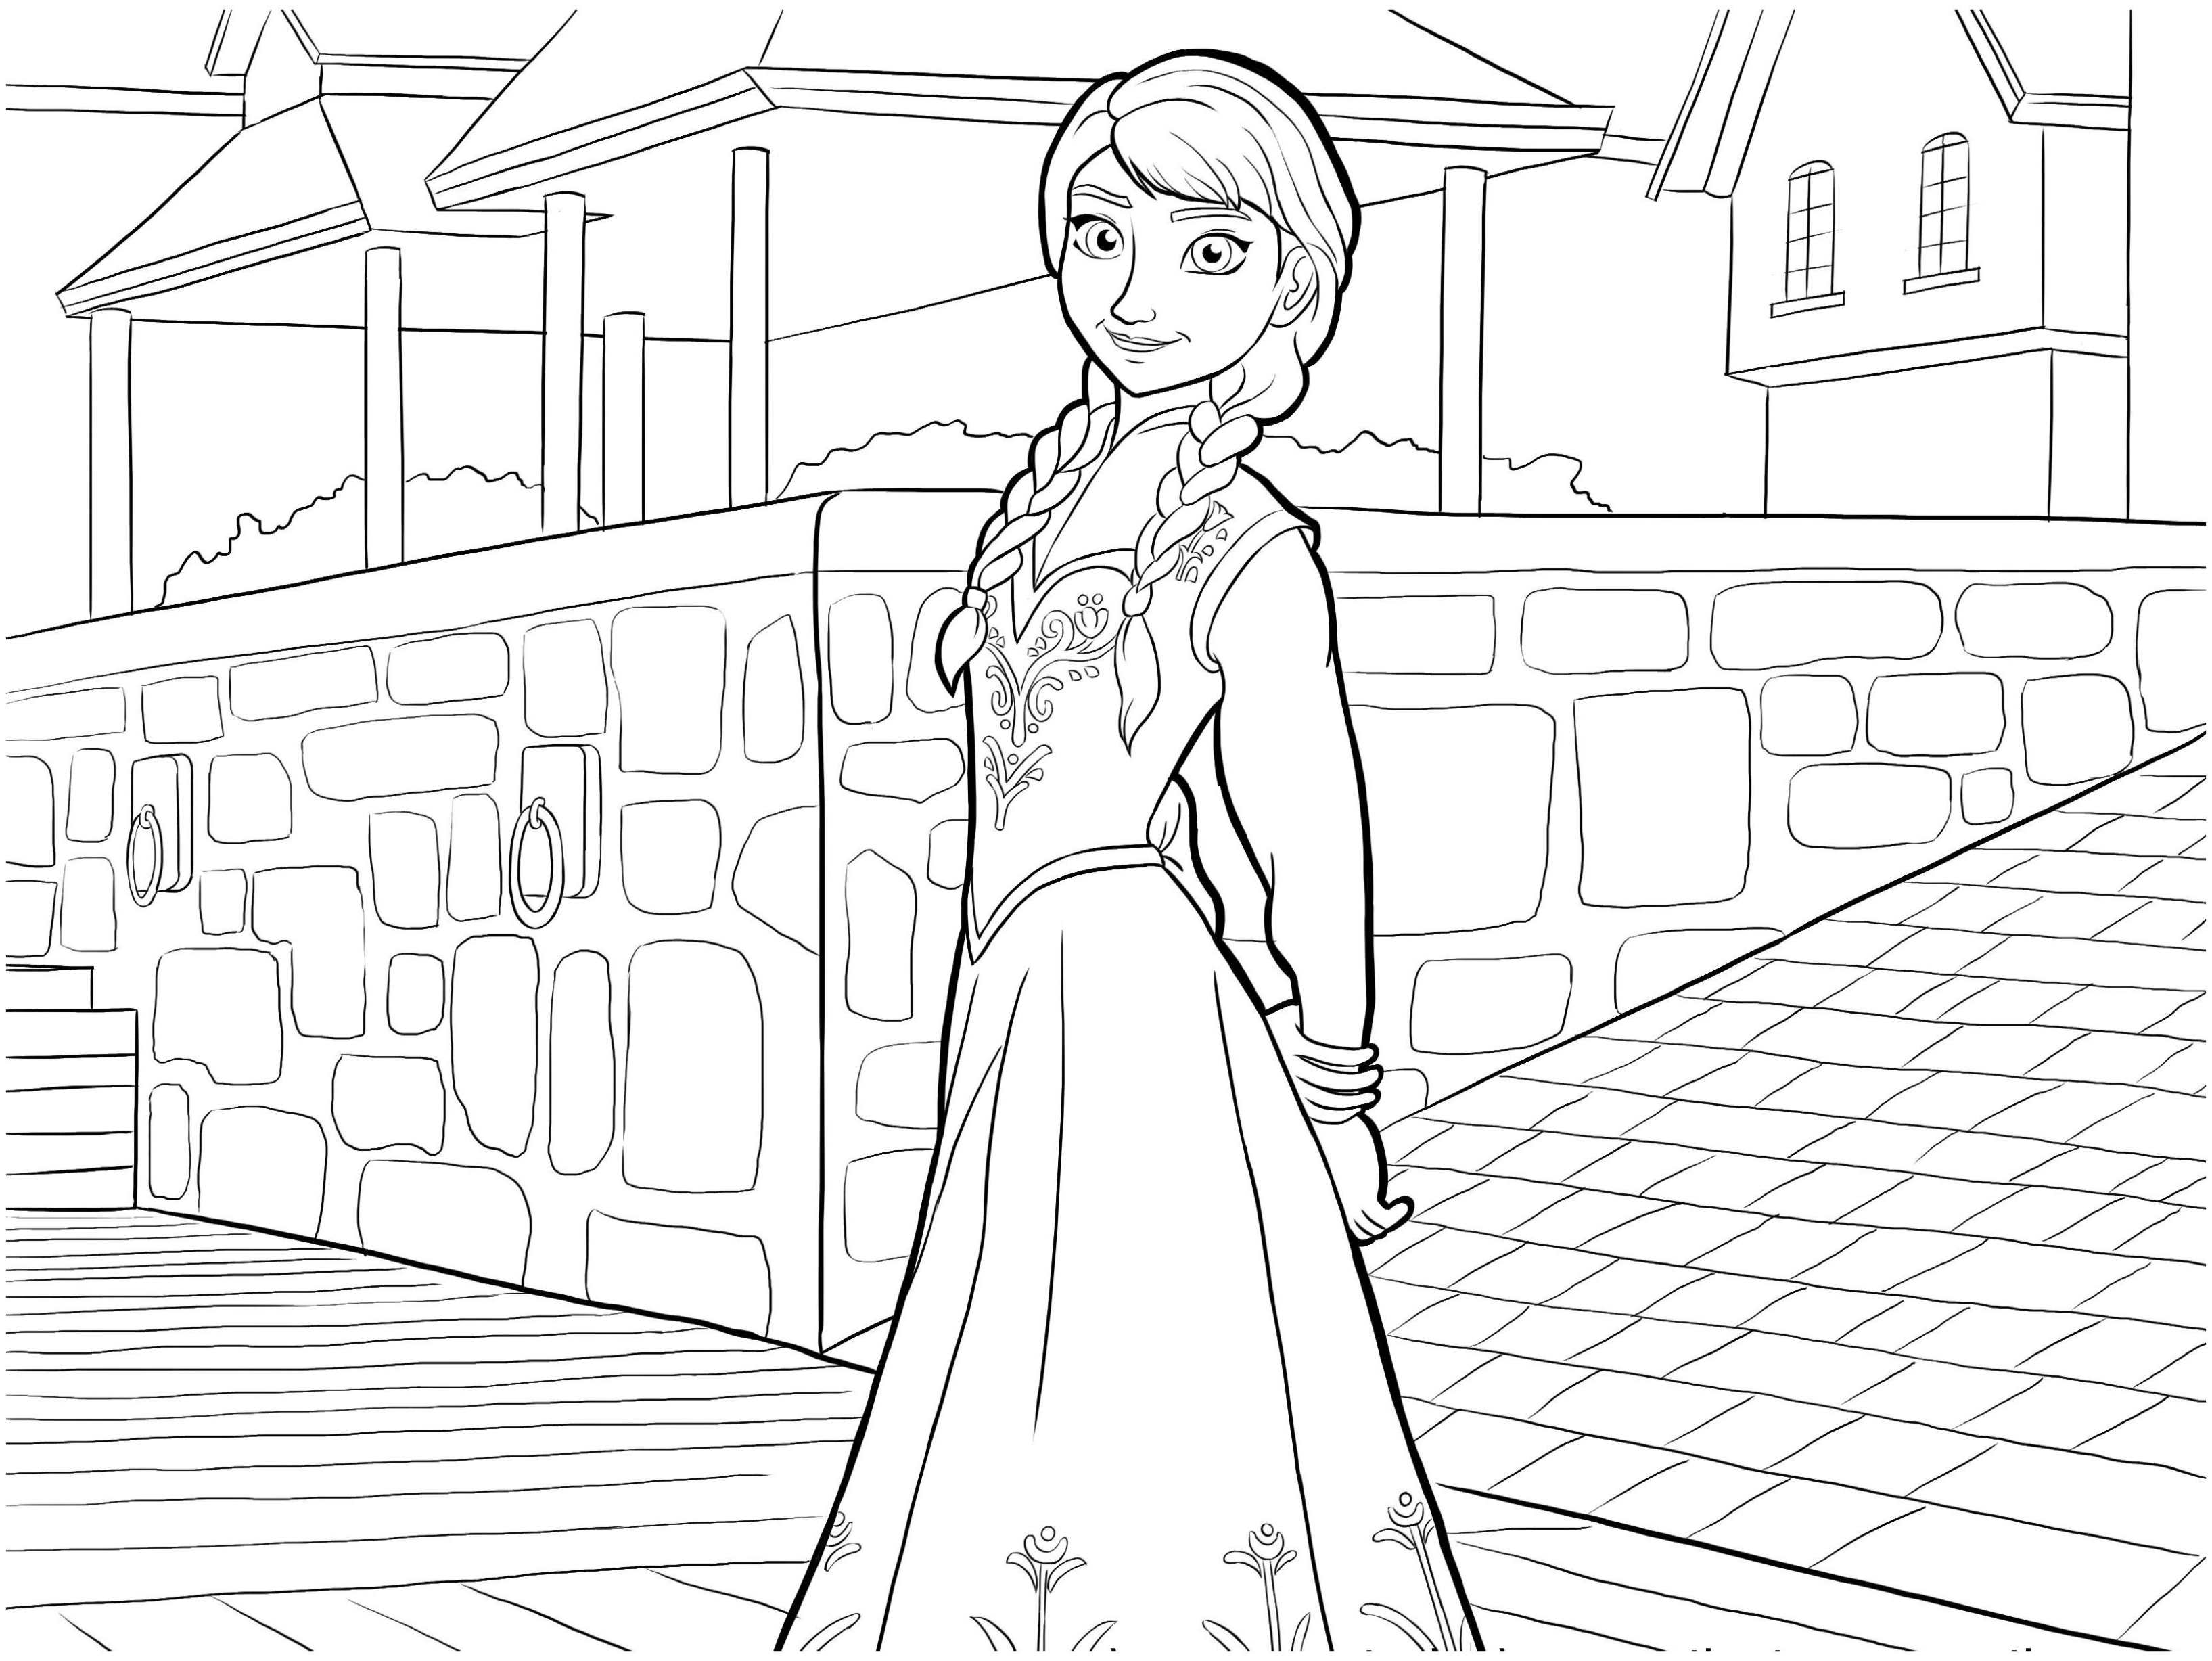 Simple Frozen coloring page to download for free : Anna and beautiful background to color